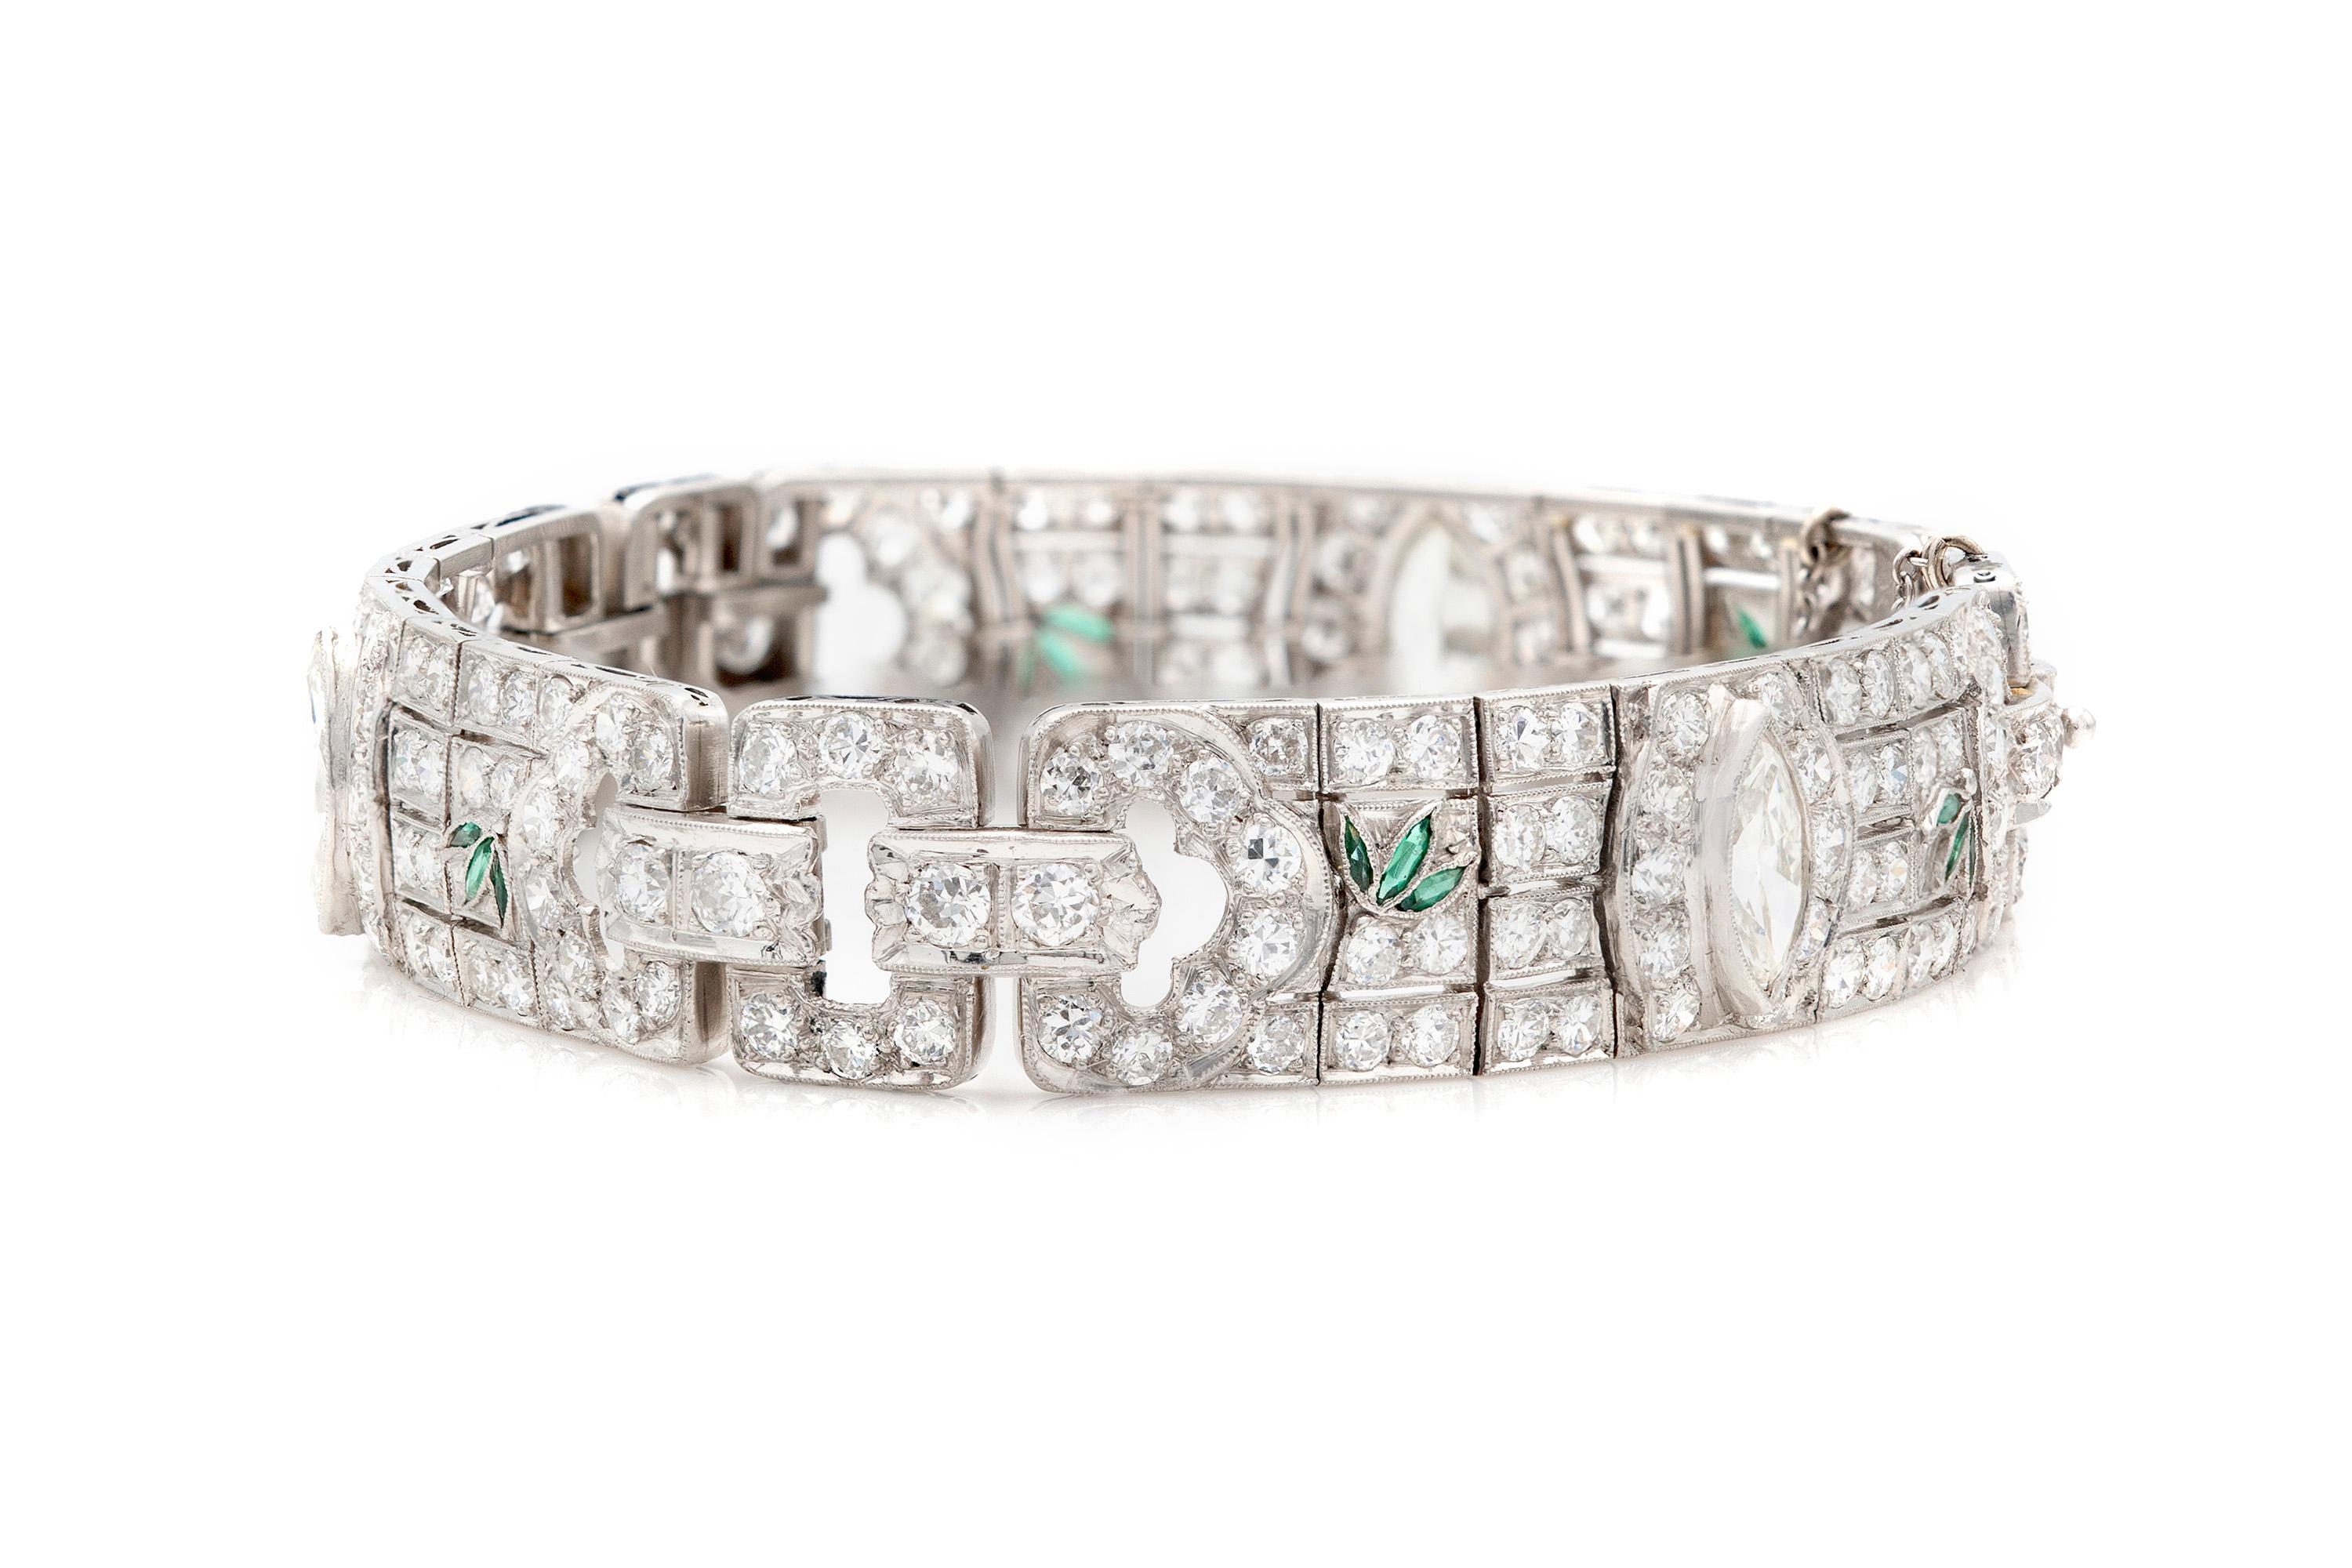 Finely crafted in platinum with three marquise diamonds weighing 2.30 carats total (approximately 0.77 carat each). The bracelet features old euopean-cut diamonds weighing approximately a total of 23.00 carats with accenting emerald.